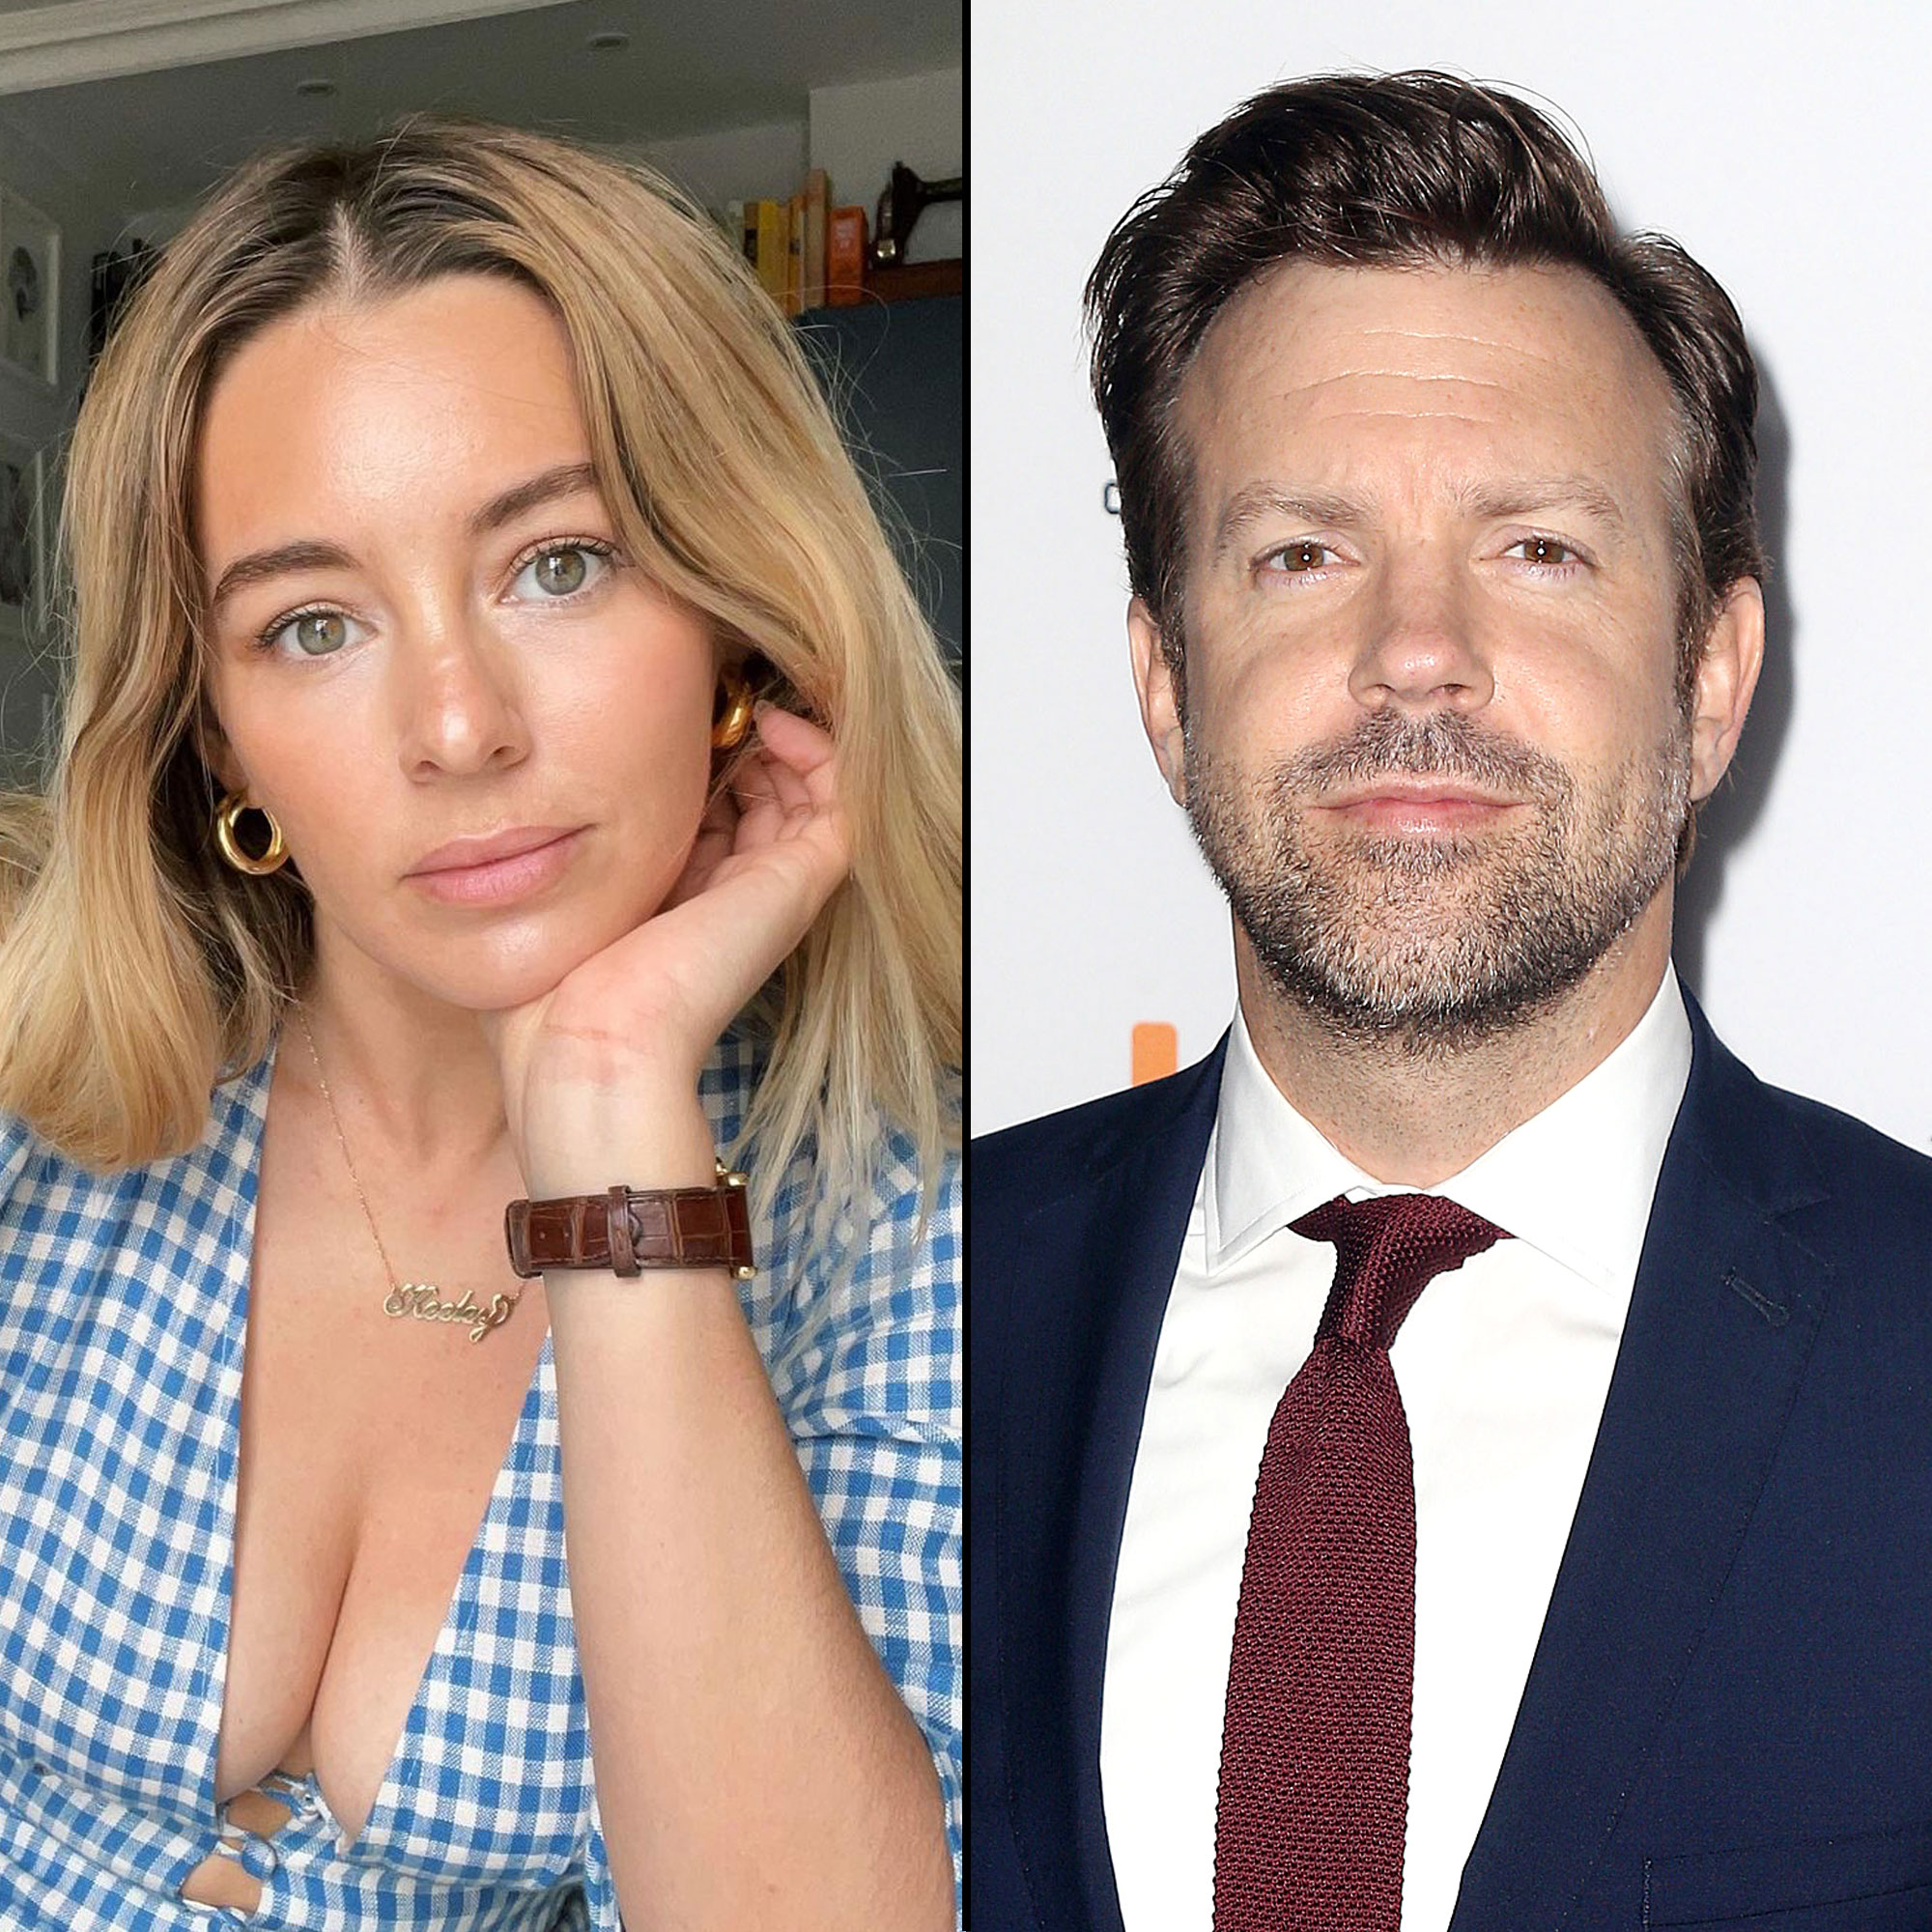 Jason Sudeikis Girlfriend Keeley Hazell 5 Things to Know pic image